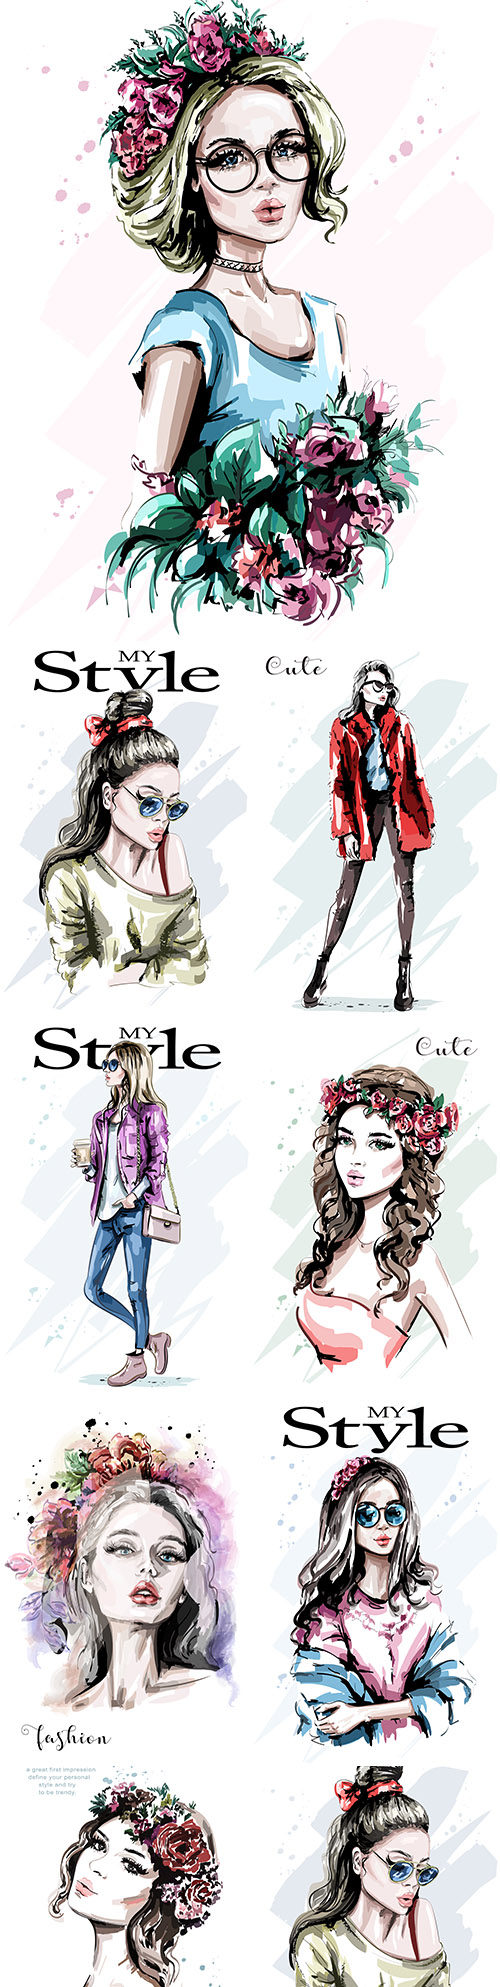 My style Hand drawn beautiful young and fashion girl 3
